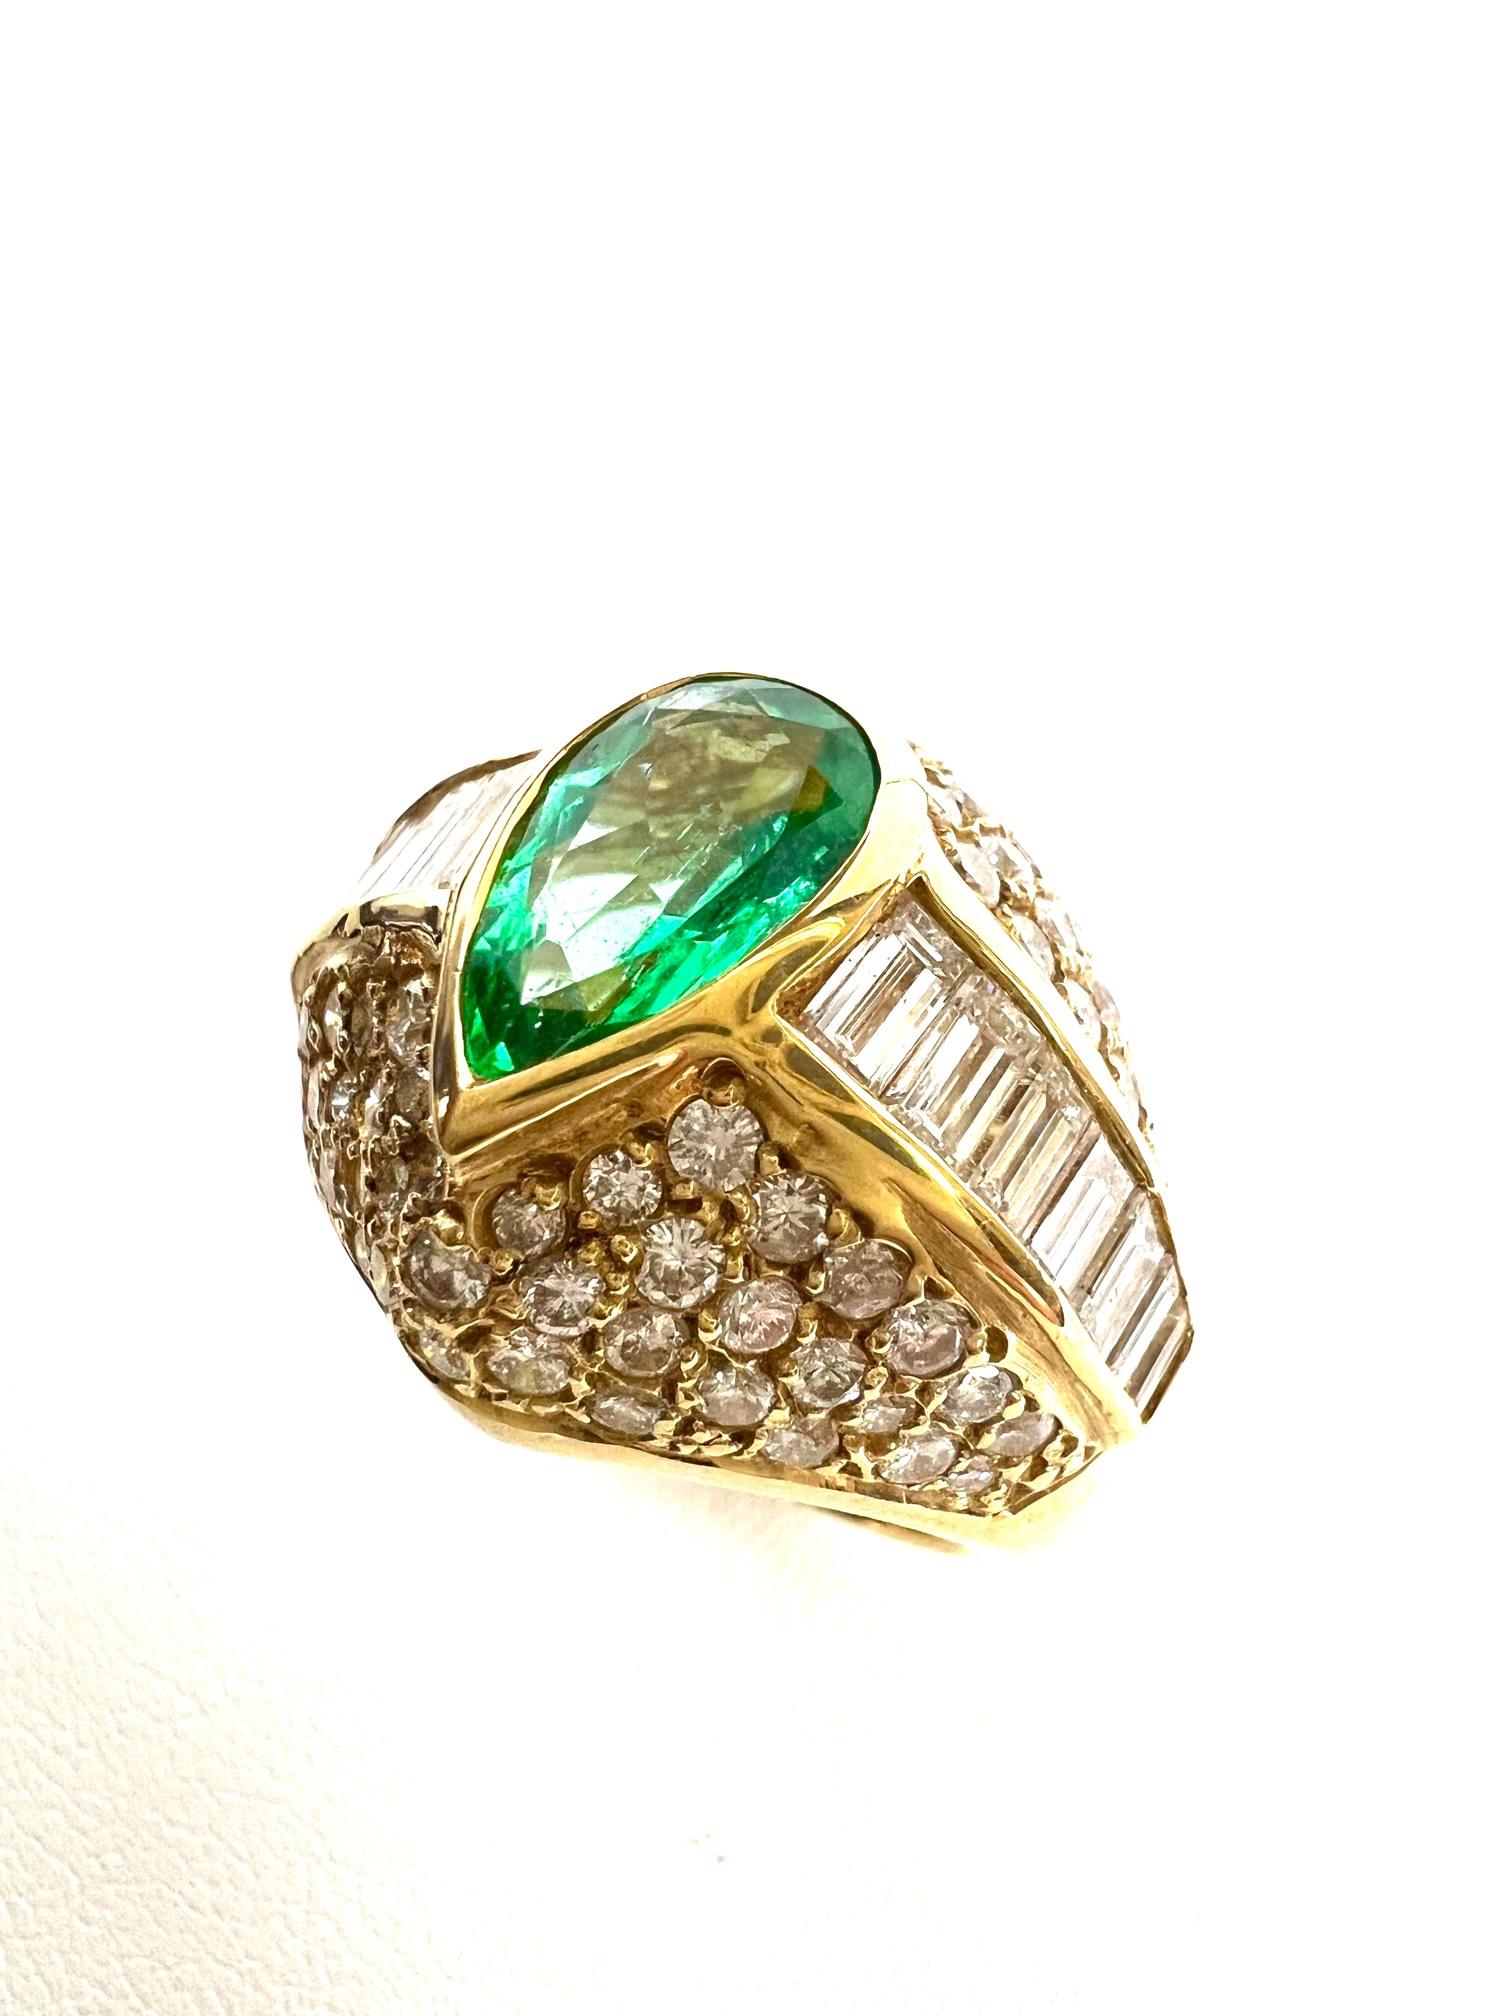 Thomas Leyser is renowned for his contemporary jewellery designs utilizing fine gemstones.

Ring in 18k Yellow Gold (16,6gr.) with 1x Emerald (pearshape, 10x6,5mm, 1,38cts.) + Diamonds (rounds and baguettes, G(VS), 3,60cts=.

Ringsize 56 (7,6).